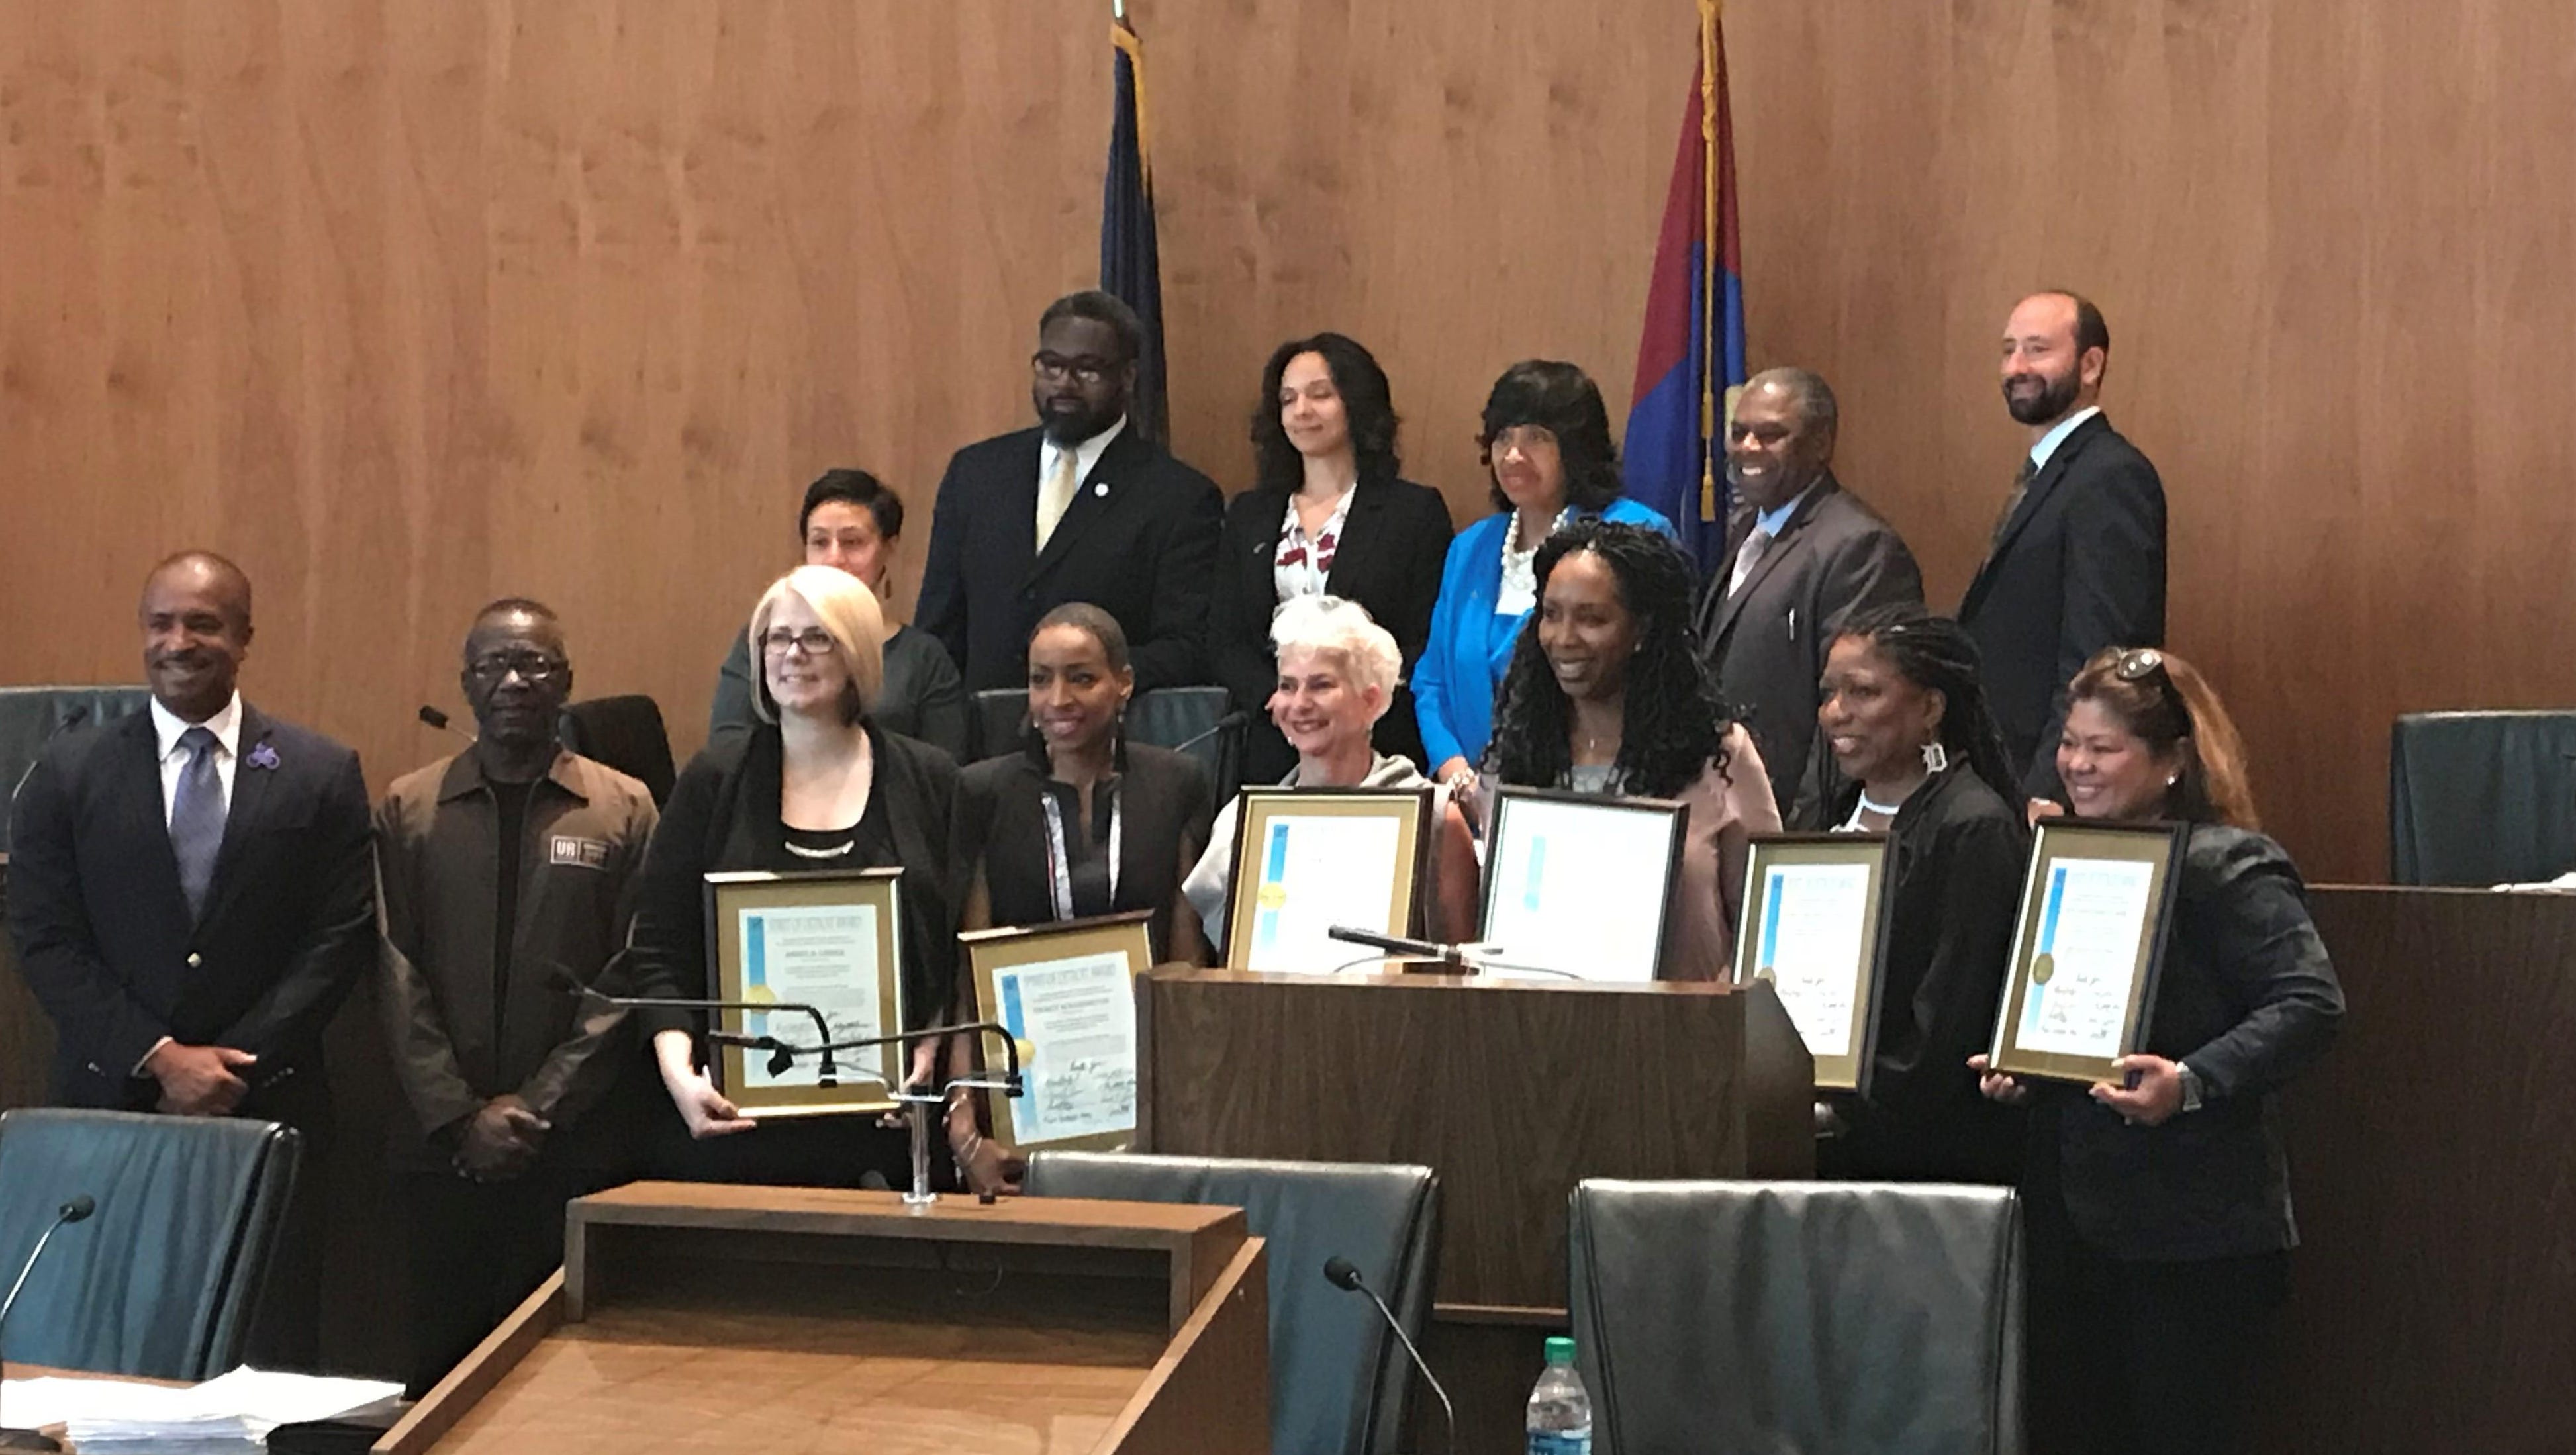 Seven women -- DJ Minx, Stacey Hale, Joy Santiago, Bridgette Banks, Traci of Mahogoni Music, Laura Gavoor (posthumously) and Angie Linder -- earned the Spirit of Detroit Award this week.